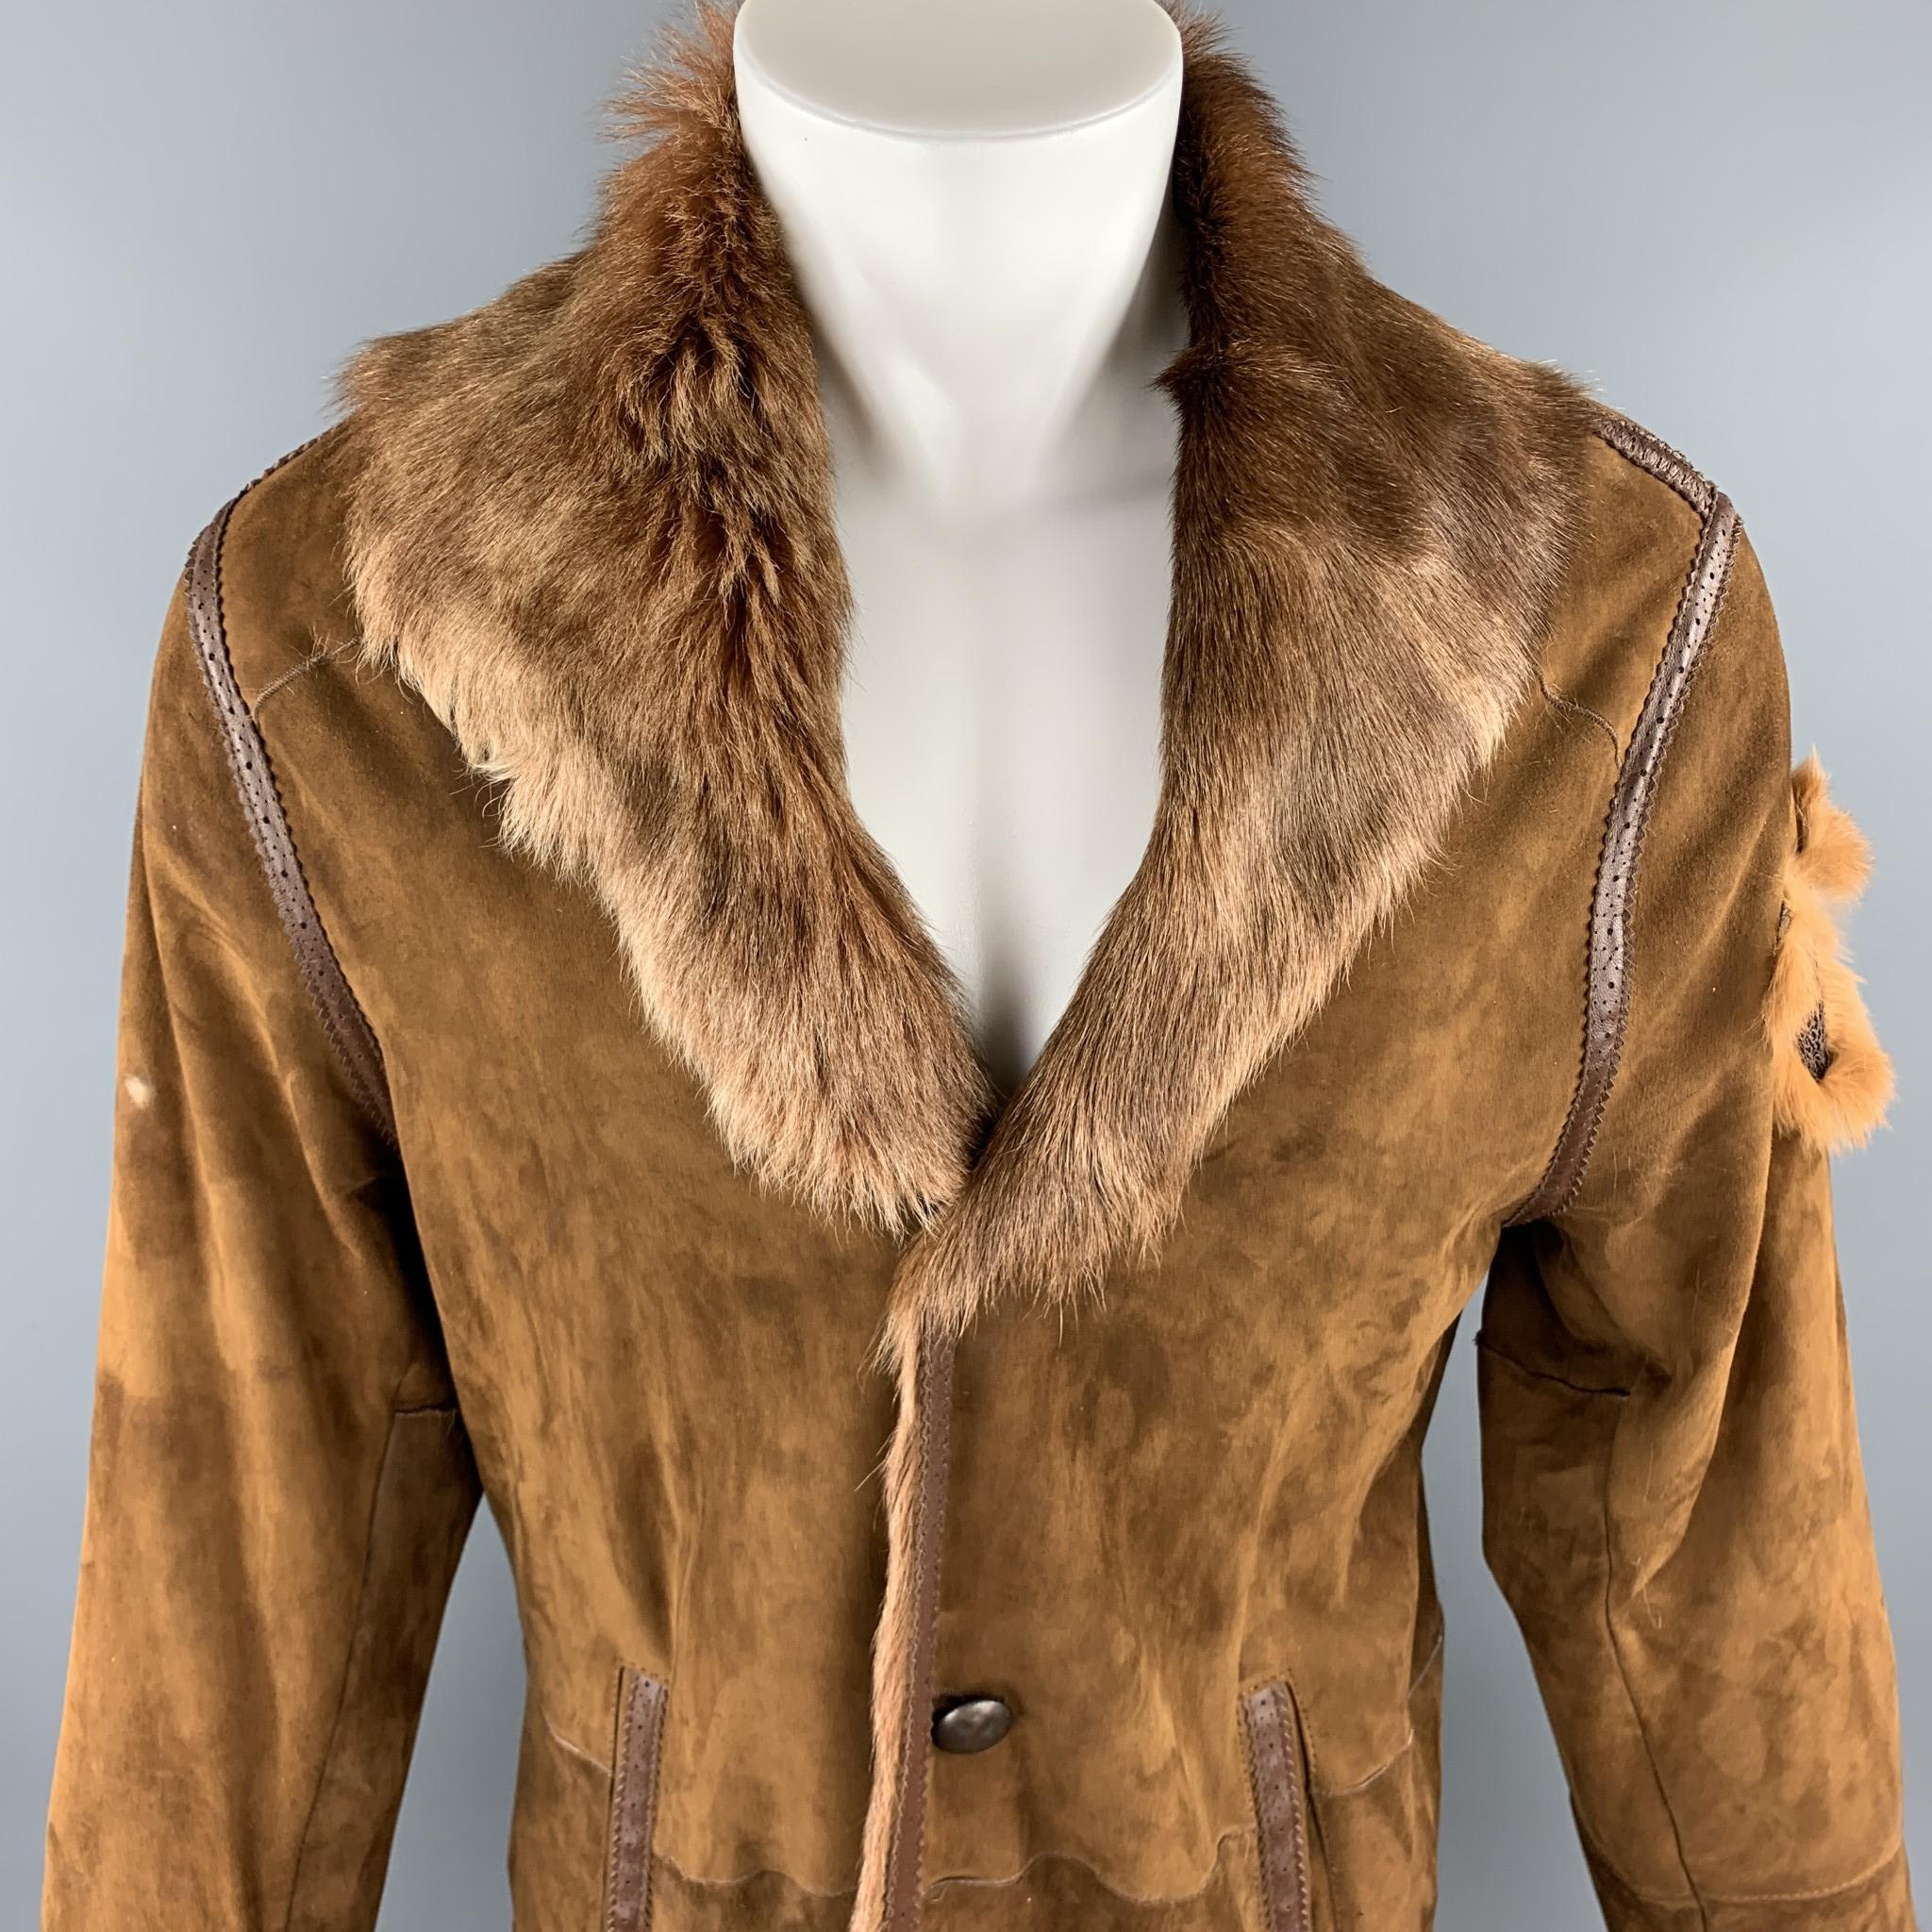 Vintage JEANS PAUL GAULTIER coat comes in tan suede with a full fur interior, wide fur collar, brown perforated brogue piping, slit pockets, hammered buttons, and bull shaped patch. Missing button and wear throughout suede. 

Good Pre-Owned